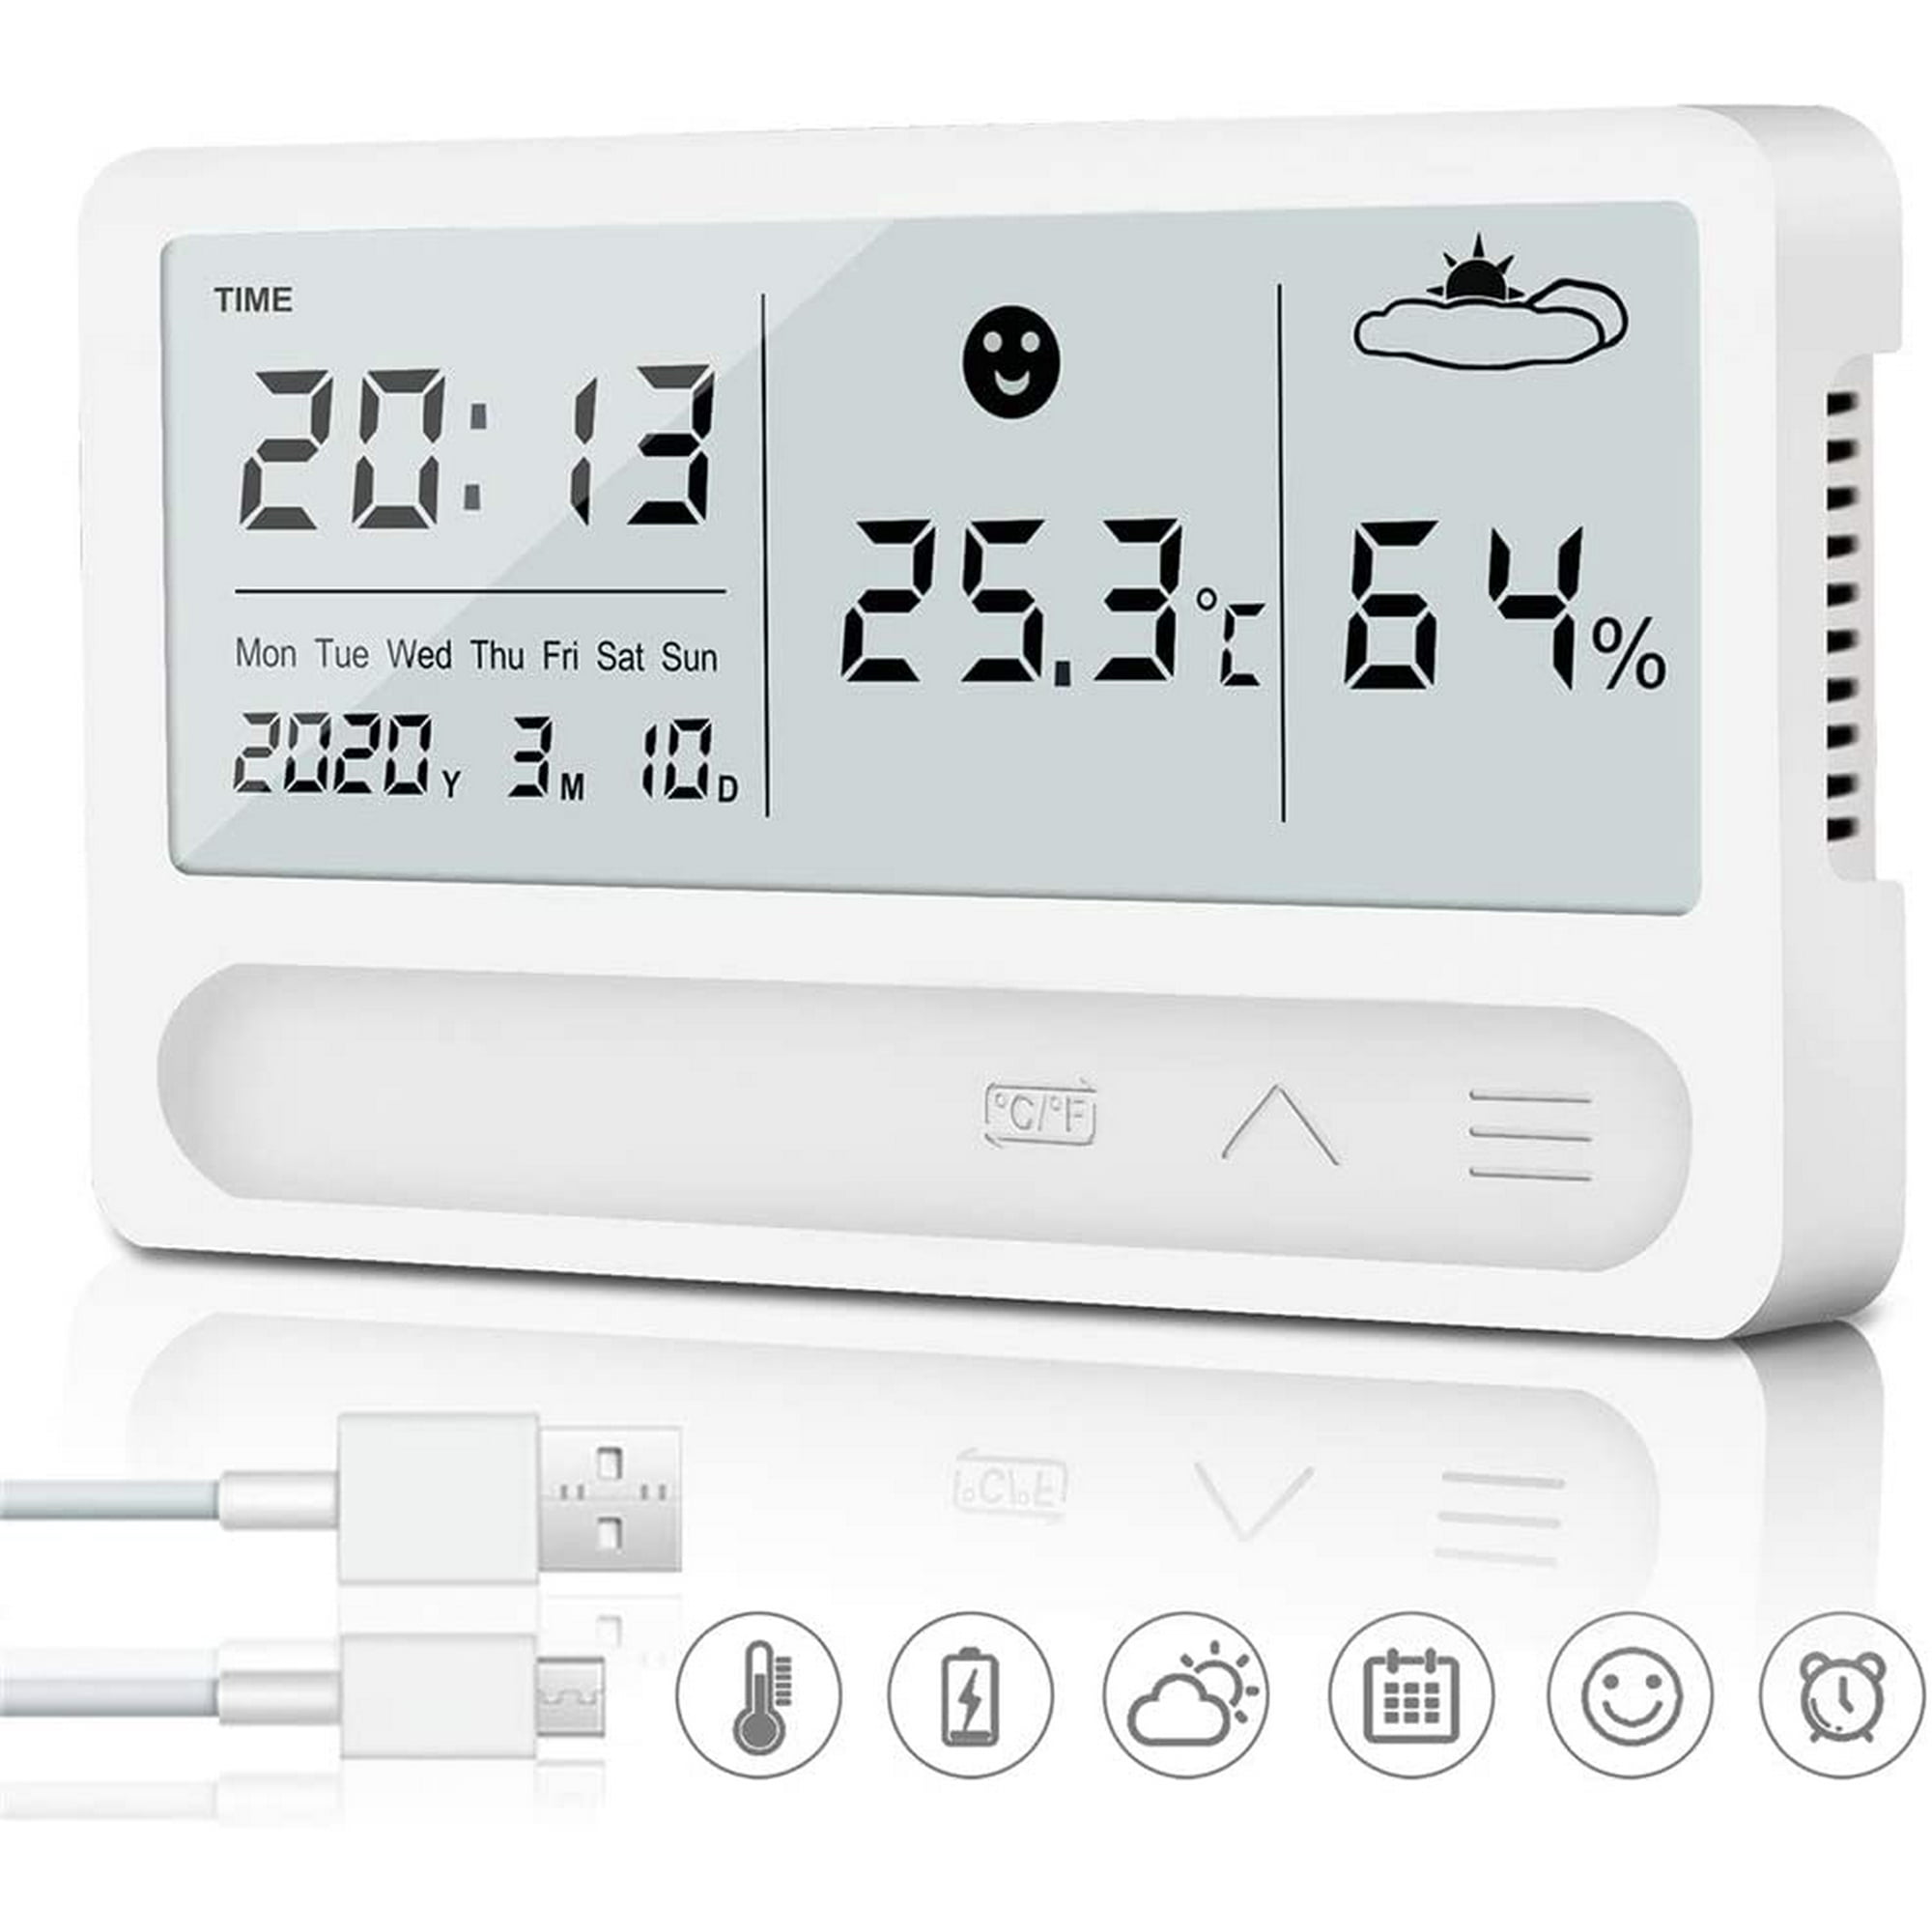 Indoor Baby Room High-Precision Digital Display Thermometer and